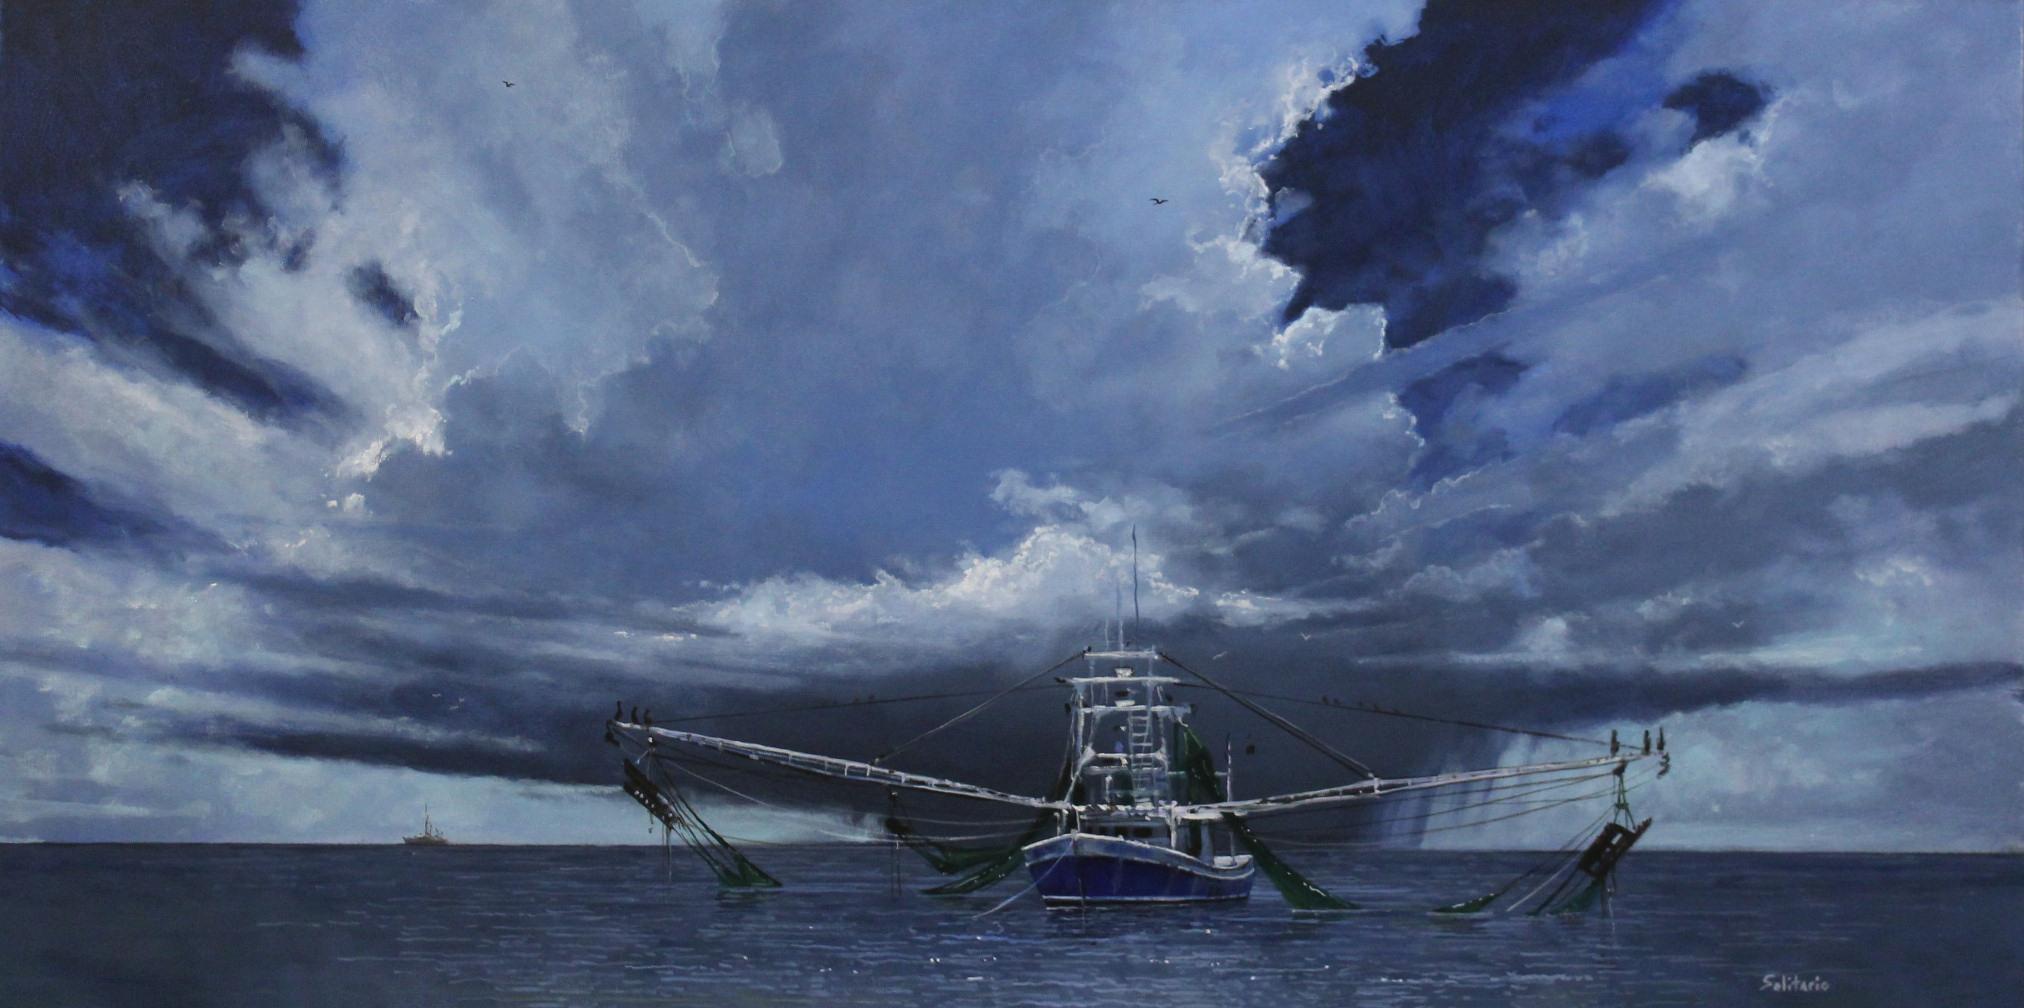 Billy Solitario Landscape Painting - "Squall Over Shrimper" original oil painting, fishing boat, ocean, sky, clouds